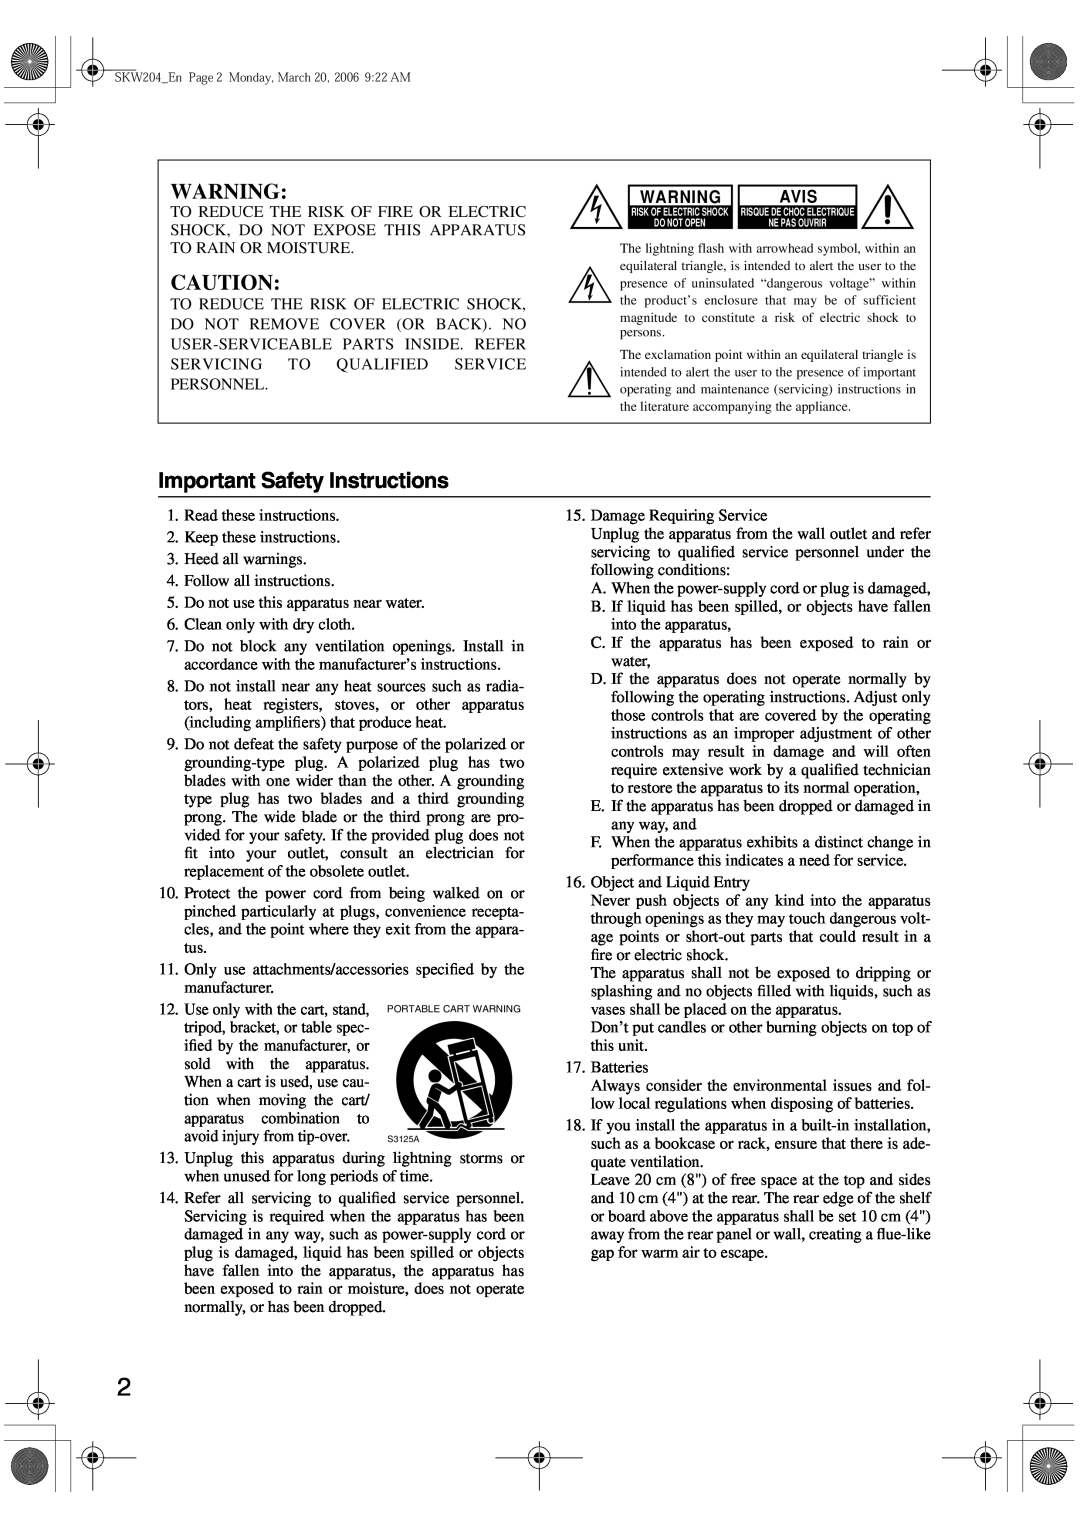 Onkyo SKW-204 instruction manual Important Safety Instructions, Avis 